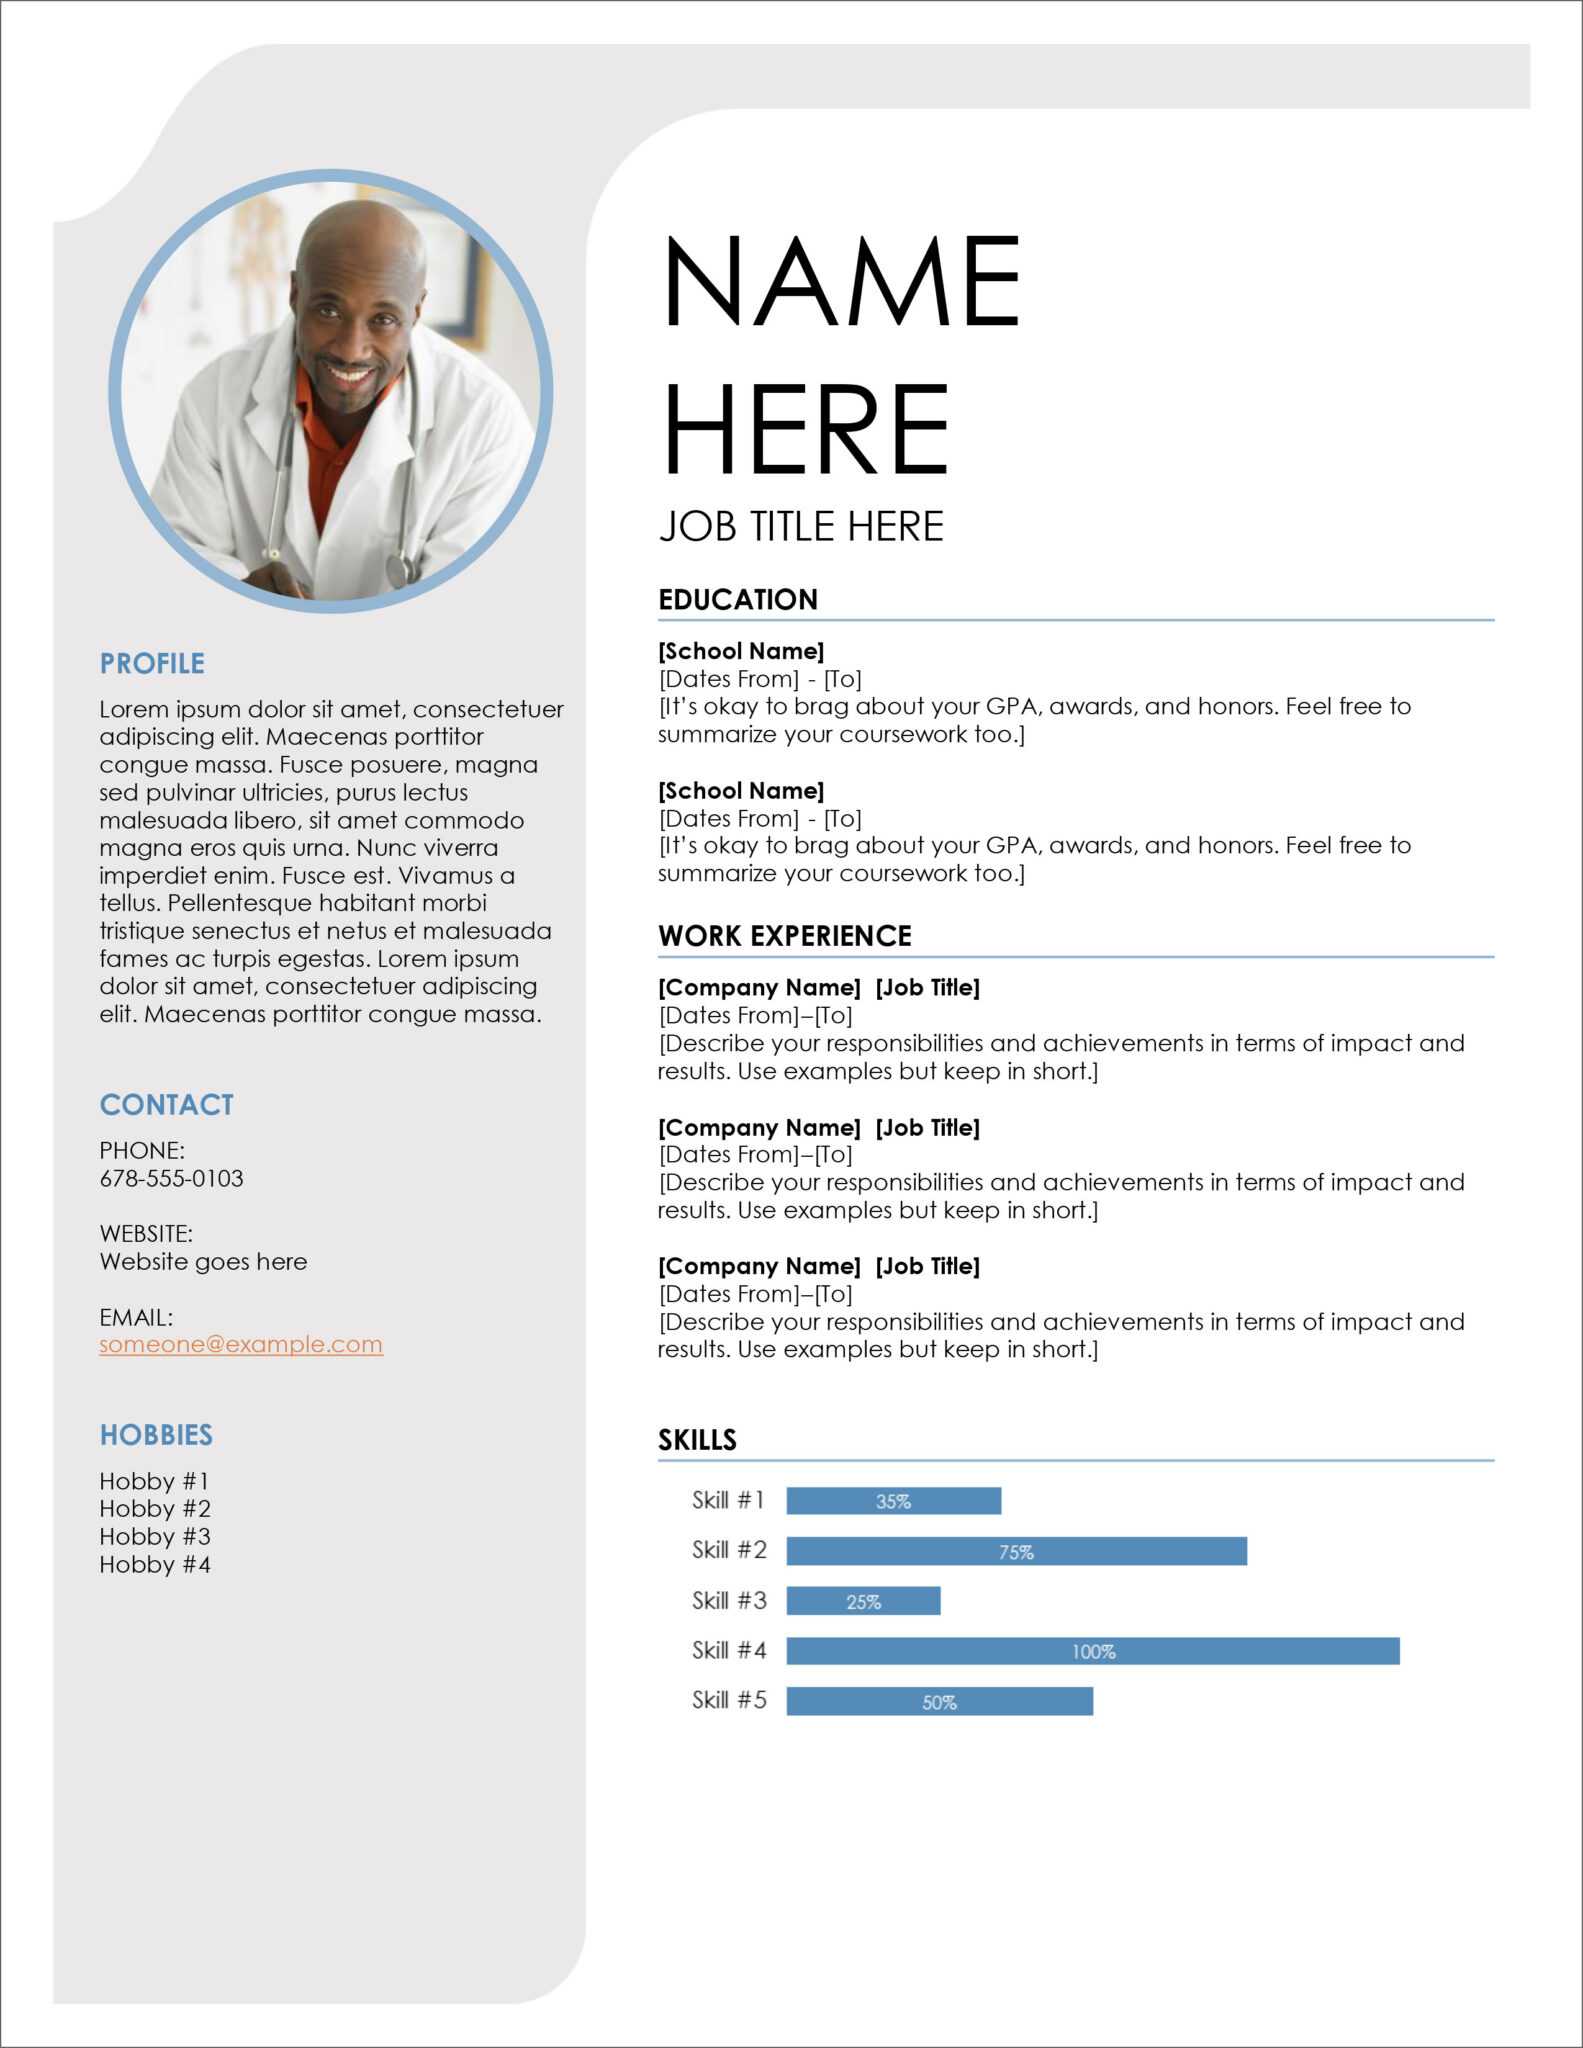 using microsoft word to make your own resume template